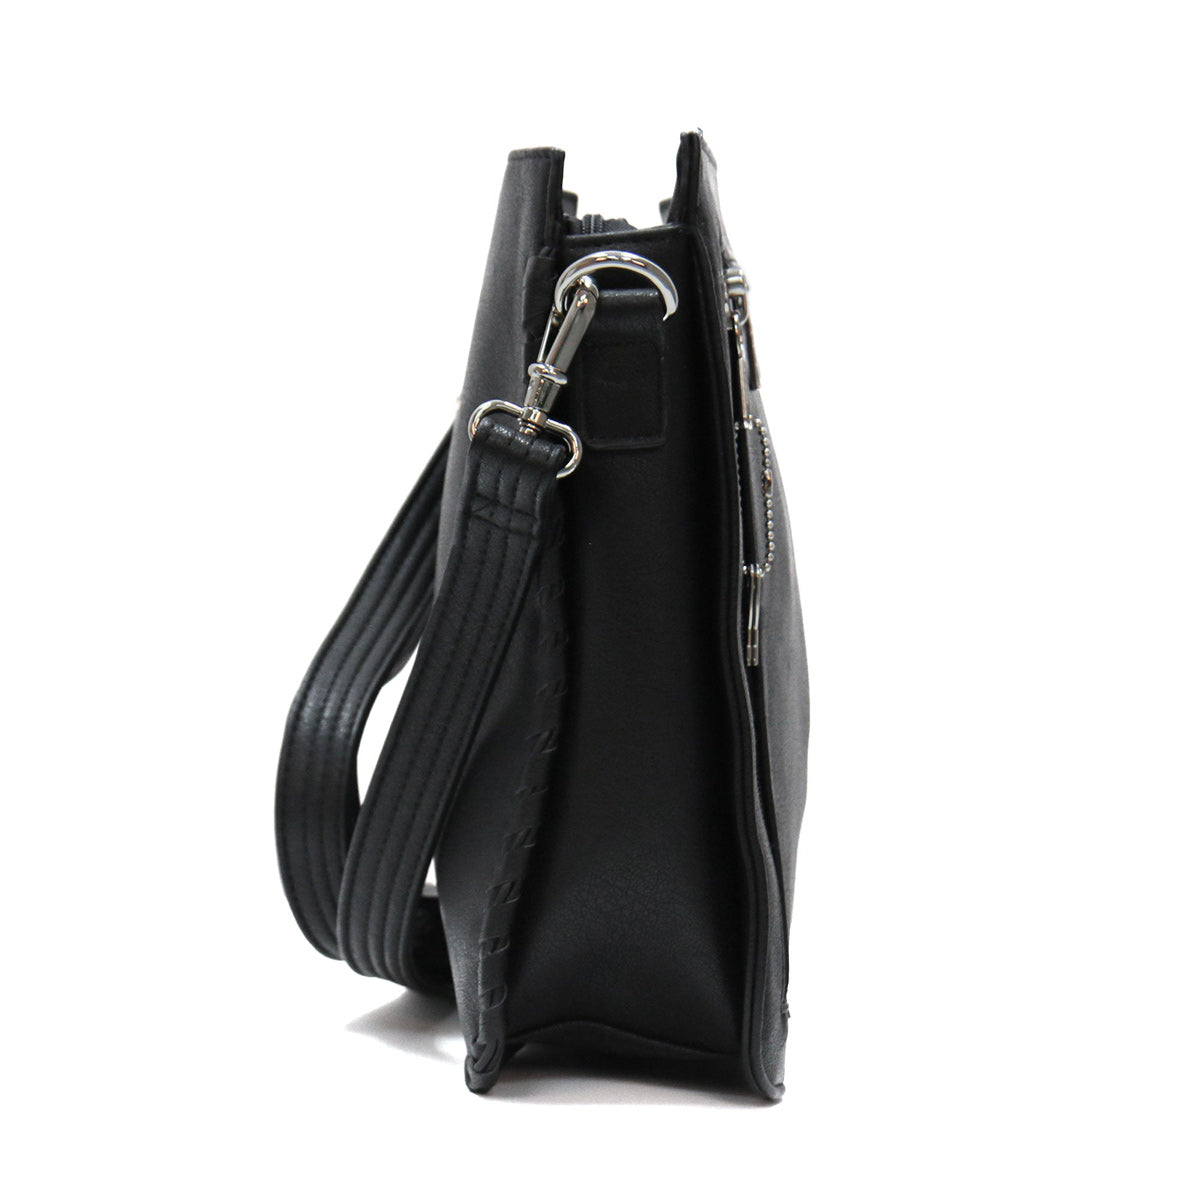 Hot Leathers PUA1177 Women's Black Hand-Crafted Laced Concealment Purse